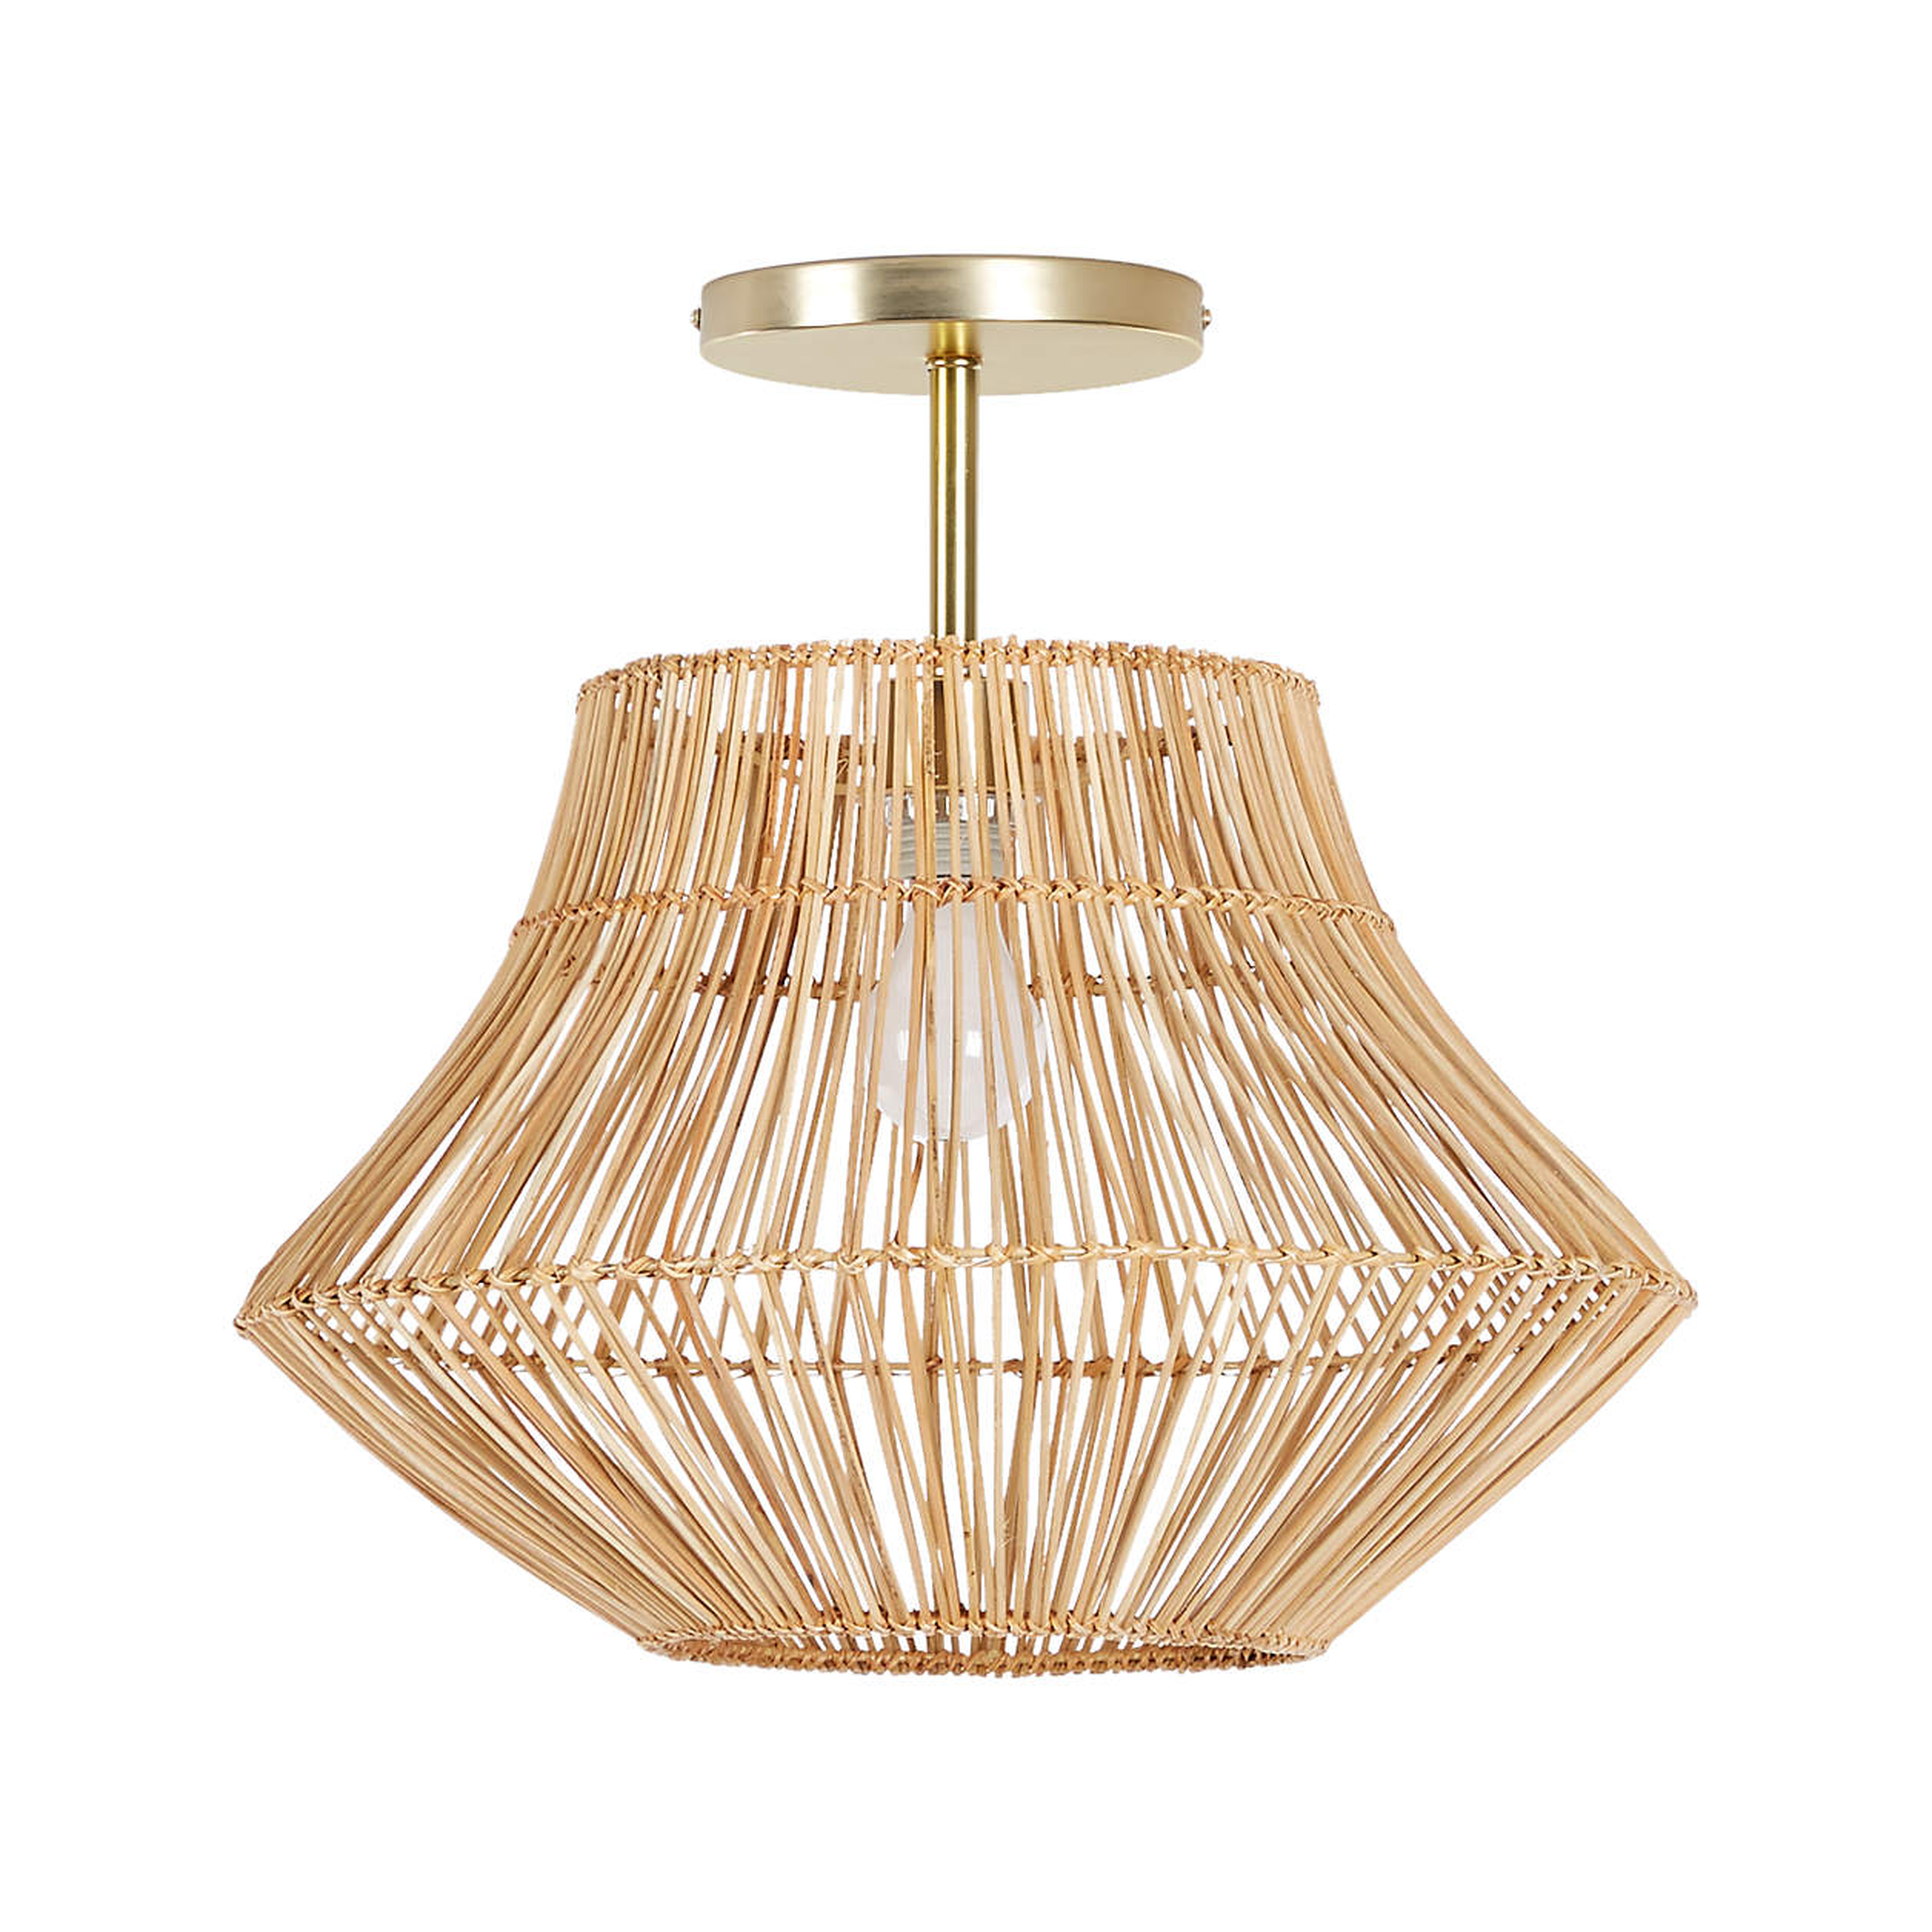 Rattan Ceiling Light - Crate and Barrel